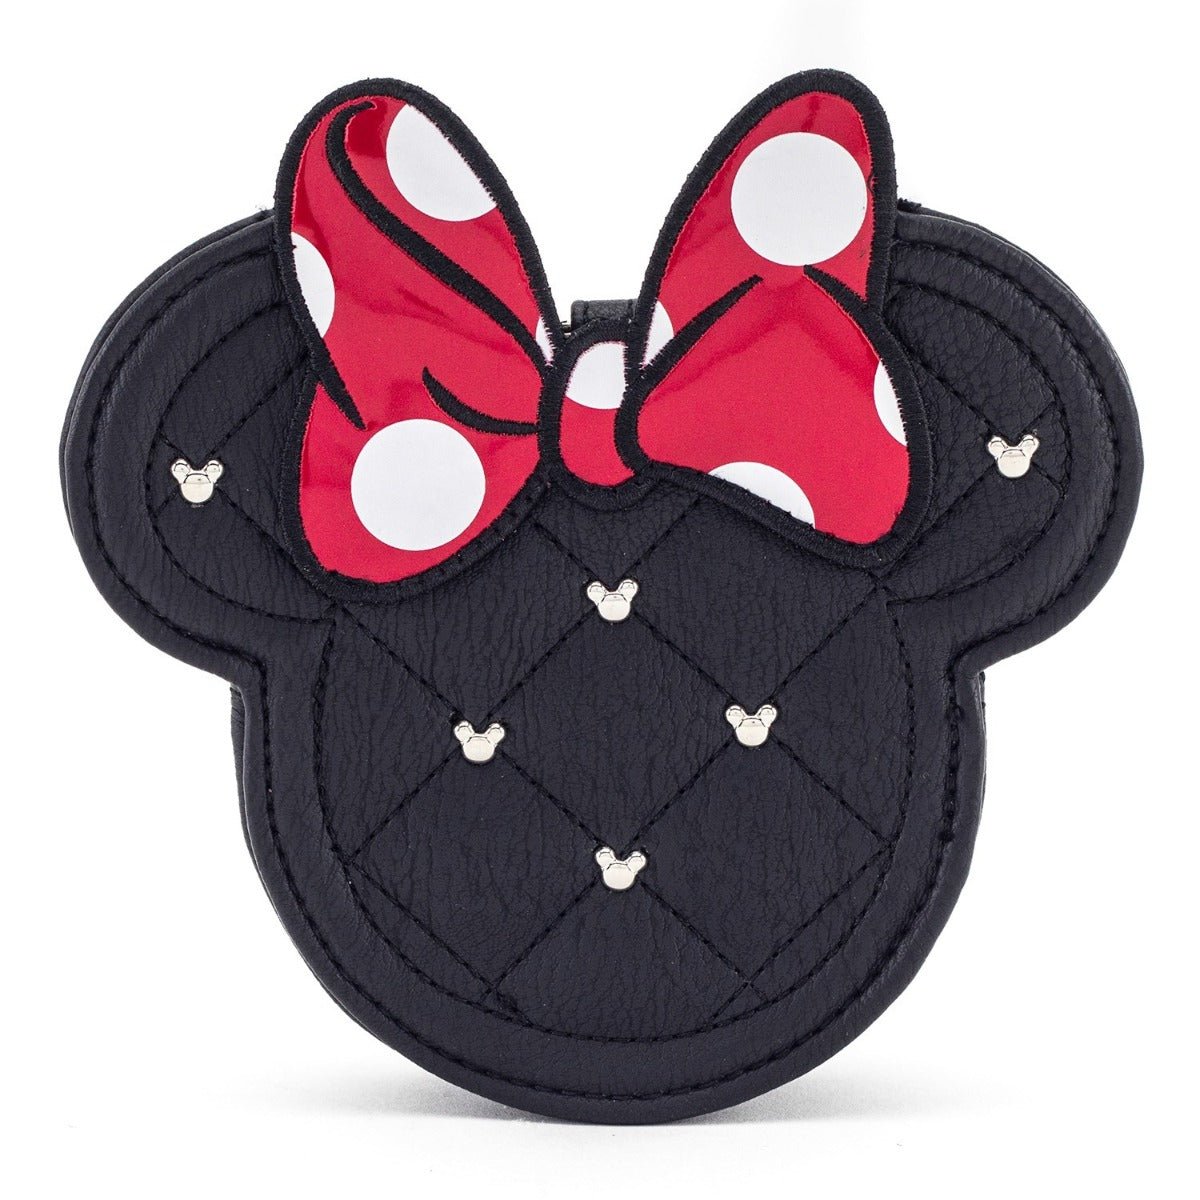 Loungefly x Minnie Mouse Quilted Coin Purse - GeekCore